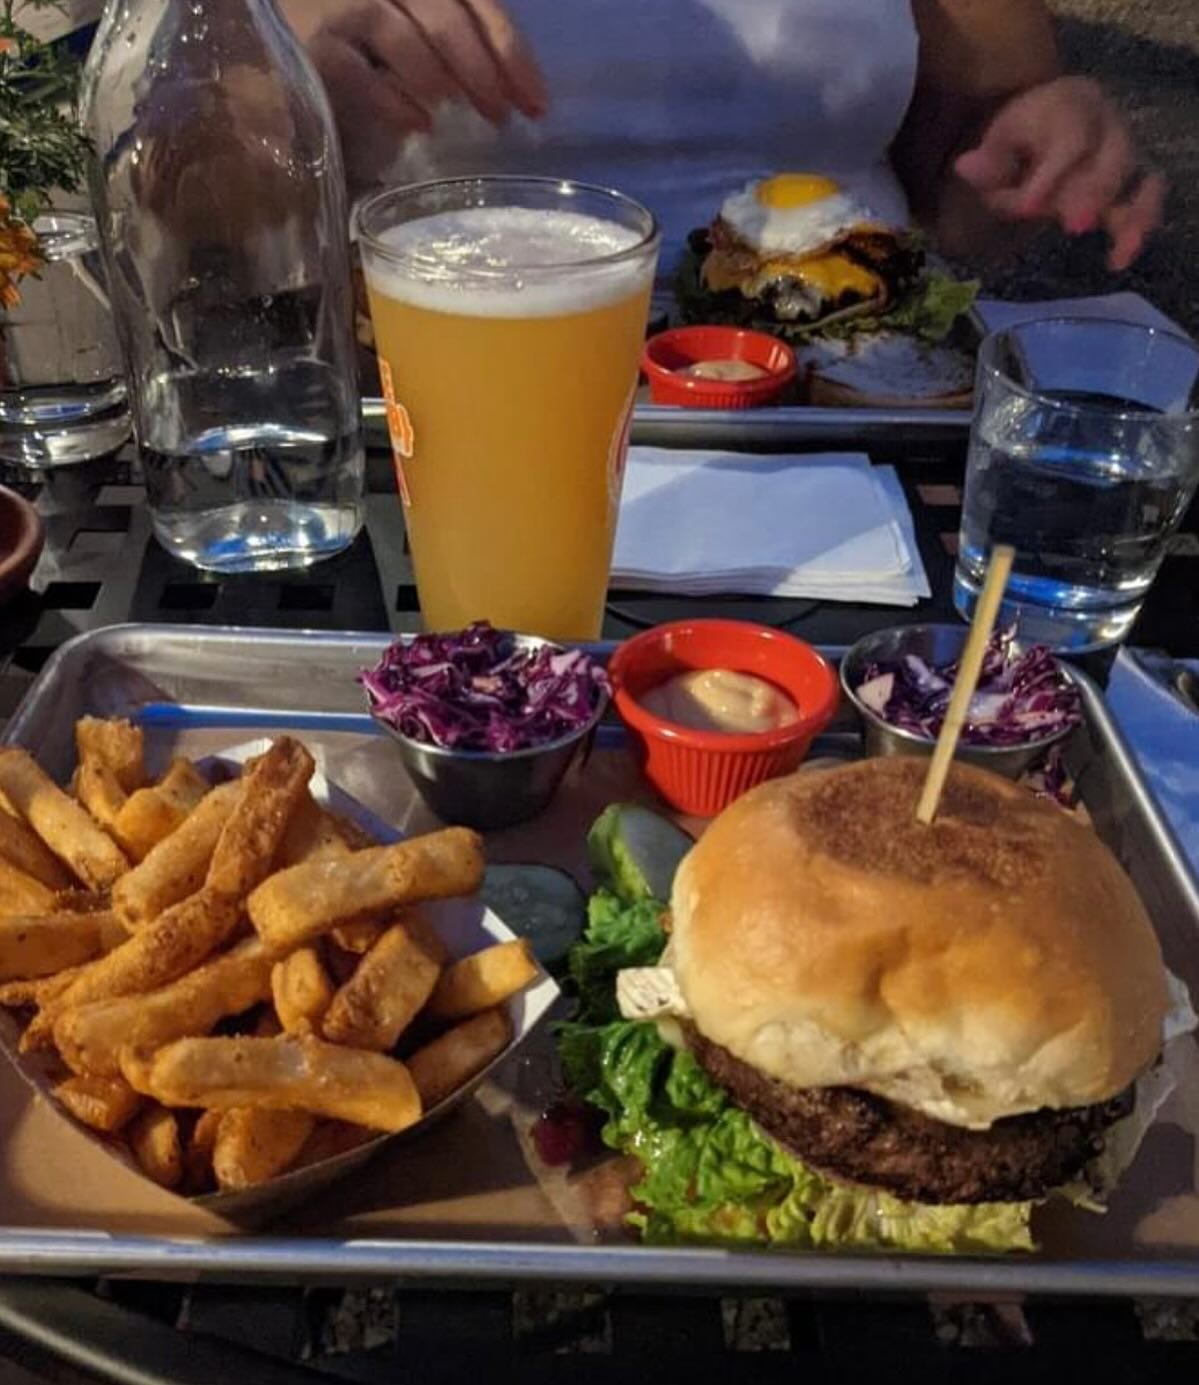 Burger✔️ Beer ✔️ Fun time with friends ✔️ wishlist complete!  #restaurant #instafood #mixology #instagood #foodie #hudsonvalley #tivoliny #kingstonny #rosendaleny #ulstercounty
#foodstagram #yummy #foodlover #instagood #delicious #healthyfood #homema